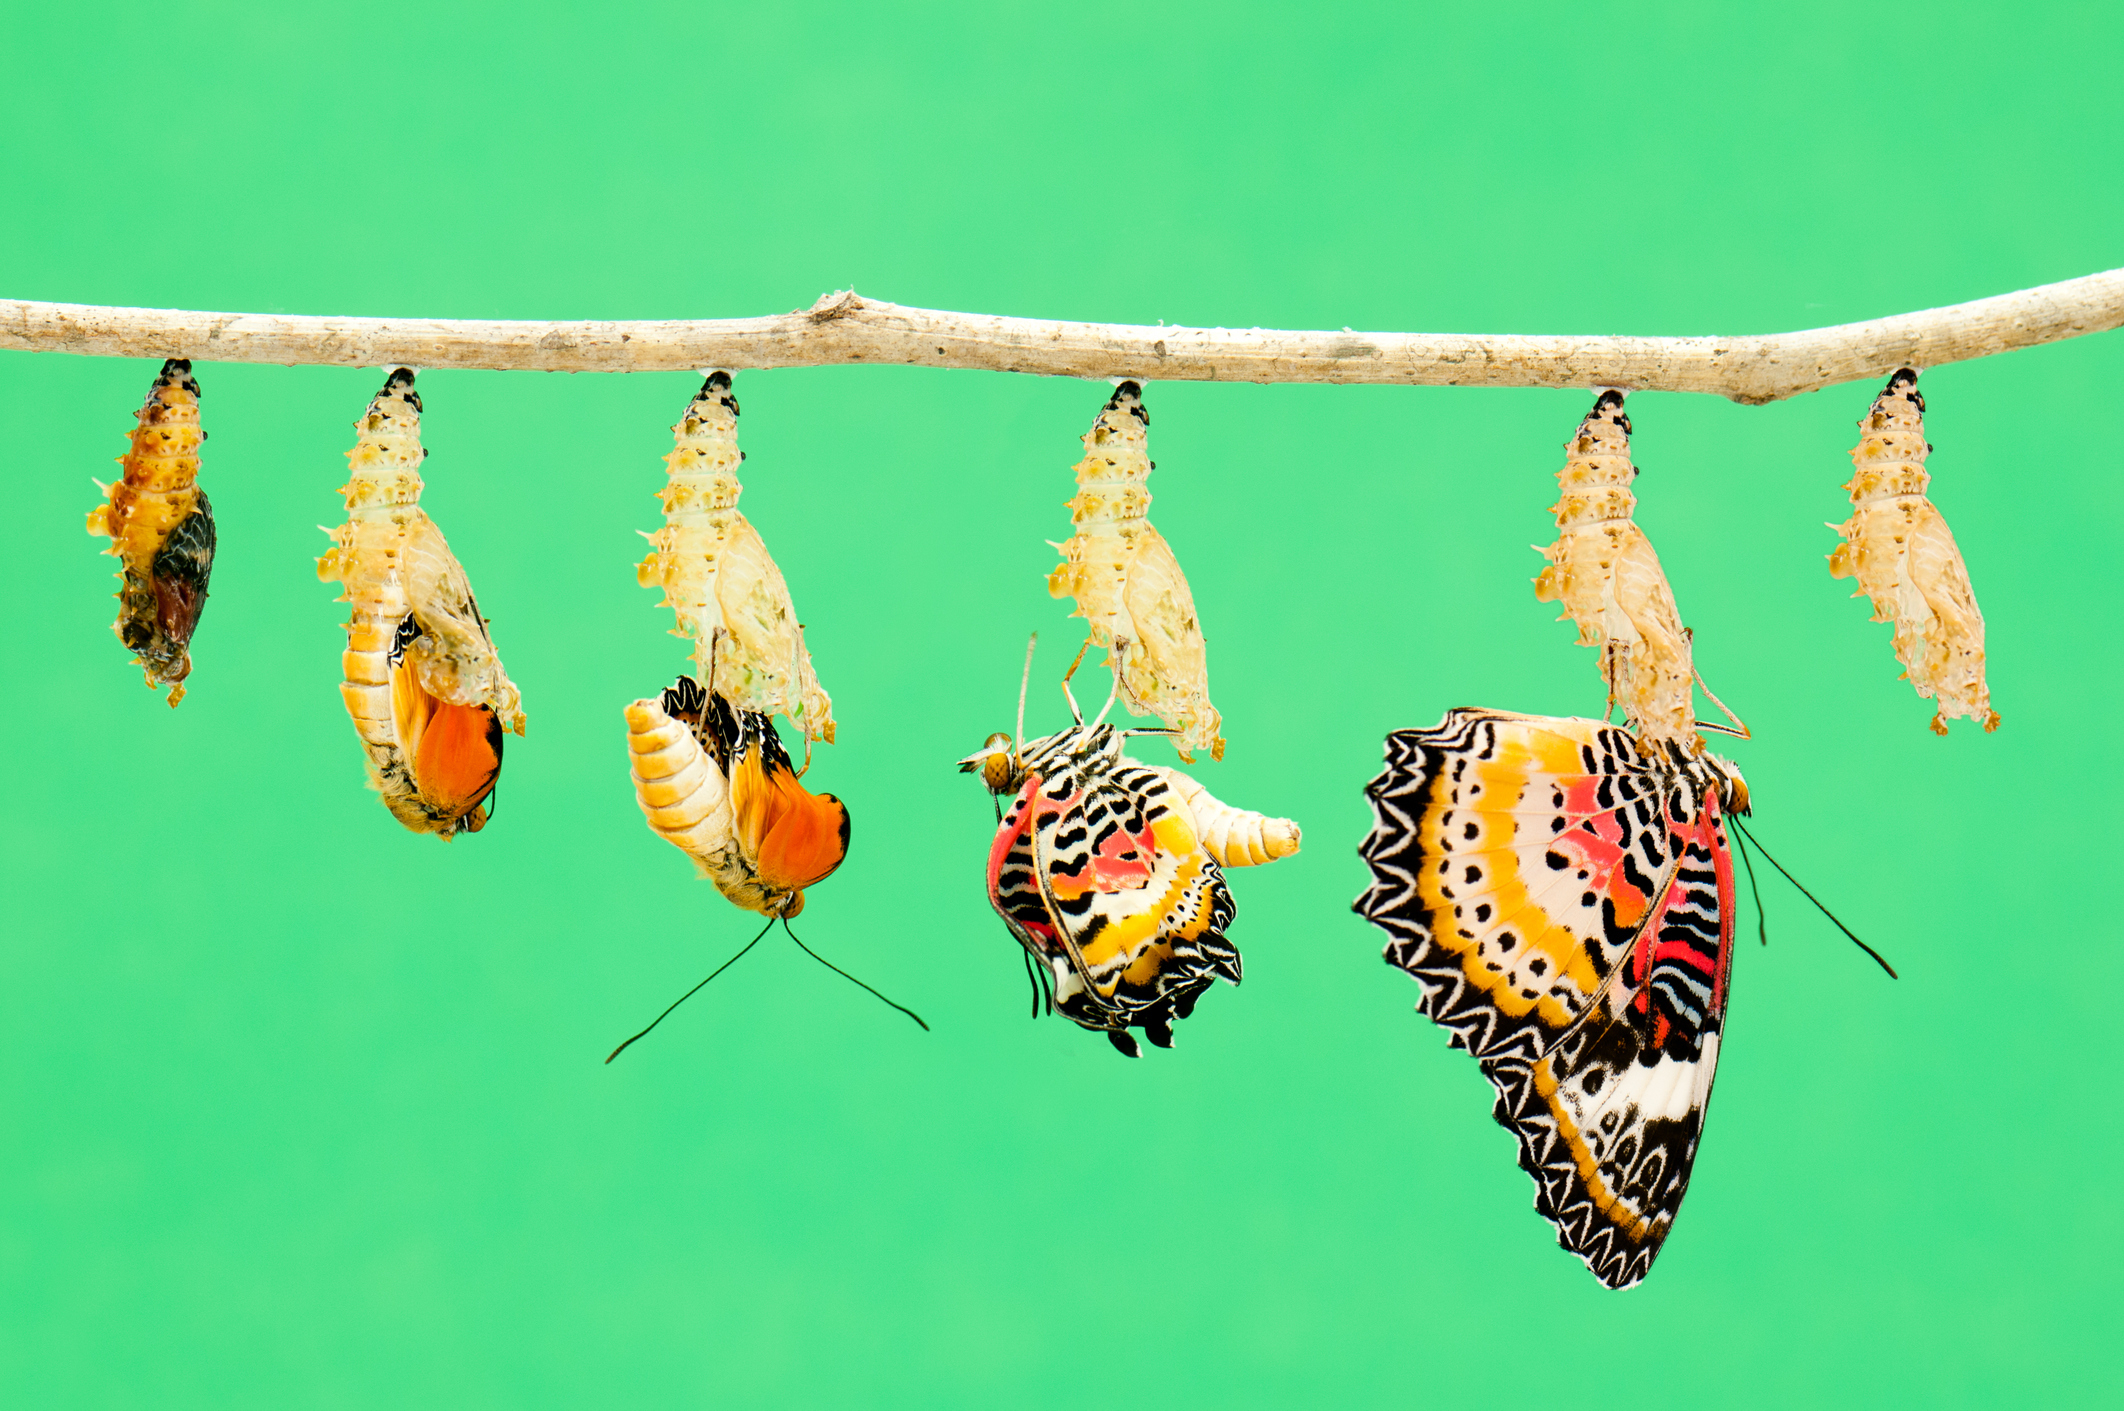 illustrated photographs of the different stage of a butterfly coming out of its cacoon